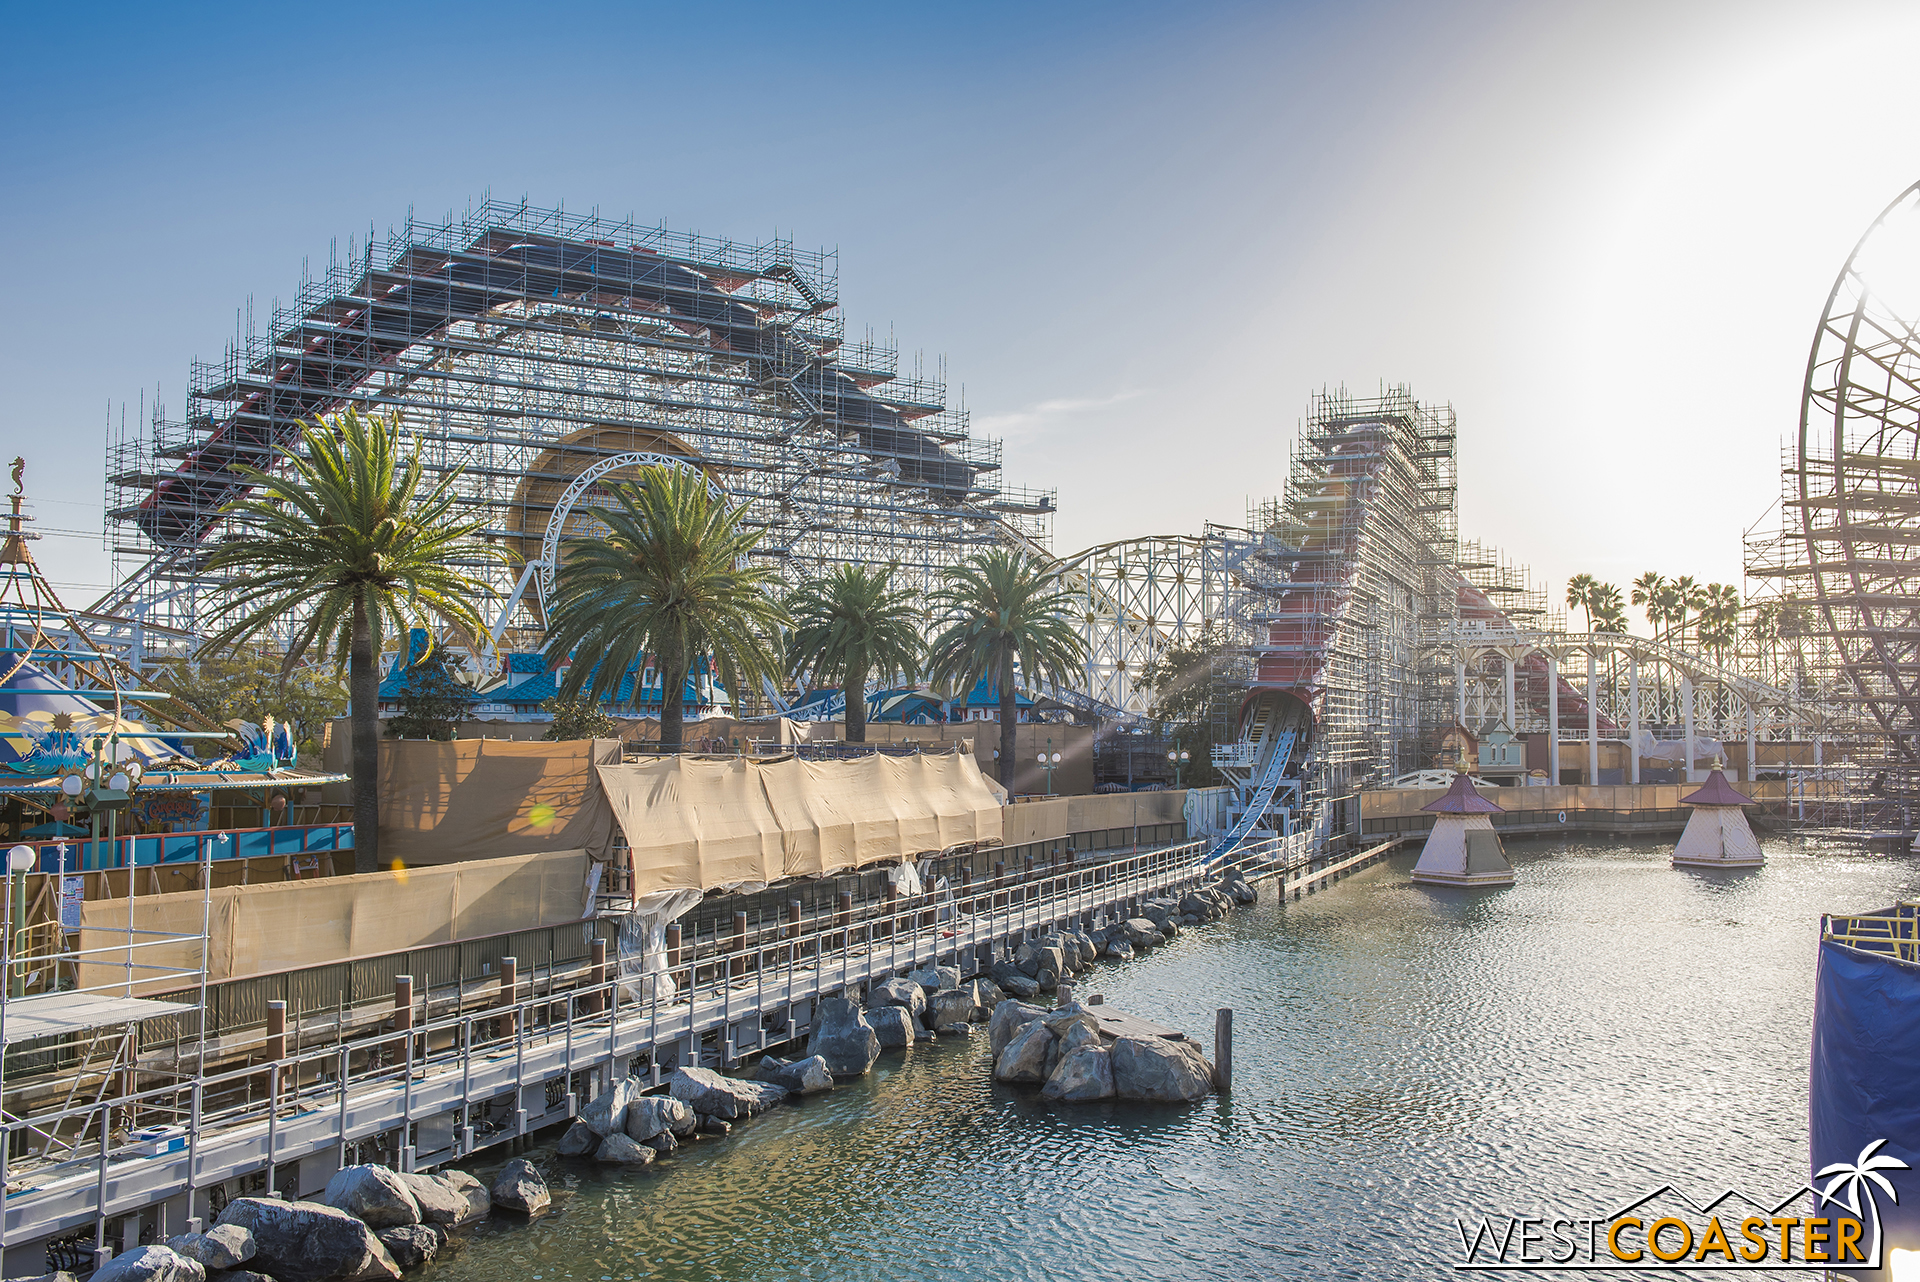  The stands alongside the water have been covered up for their transformation into their new Pixar-themed identiies. 